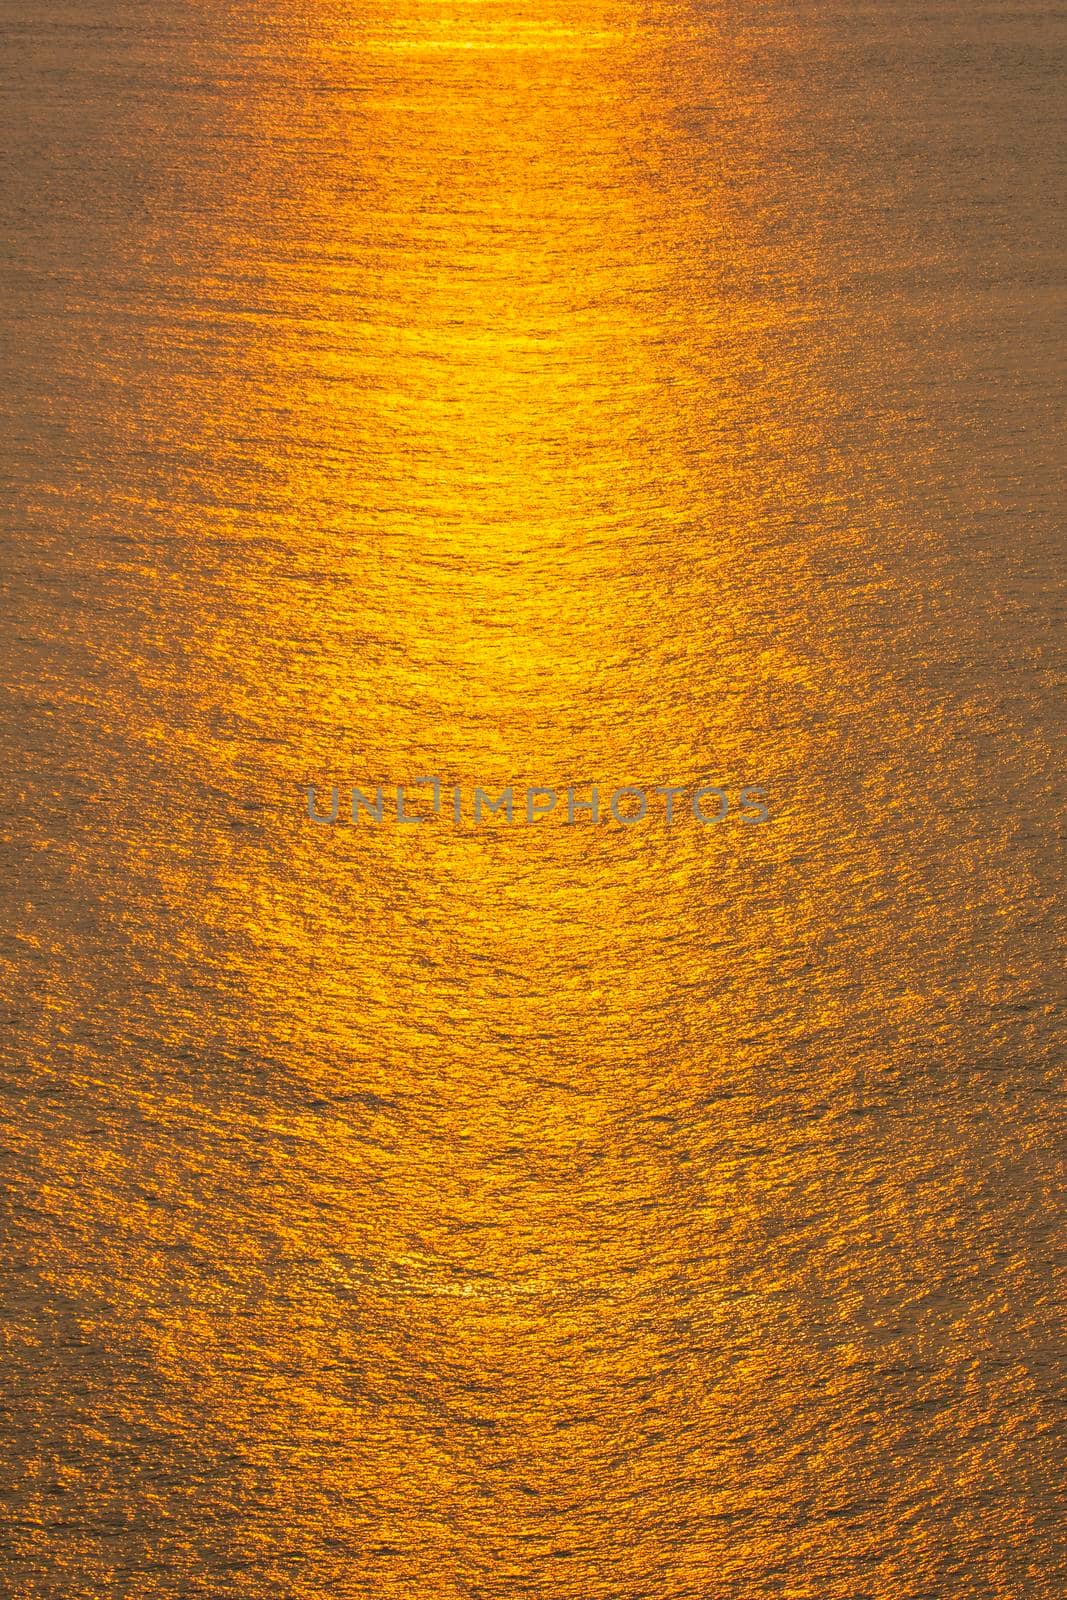 Sunset The sea surface reflects the sunlight in gold.